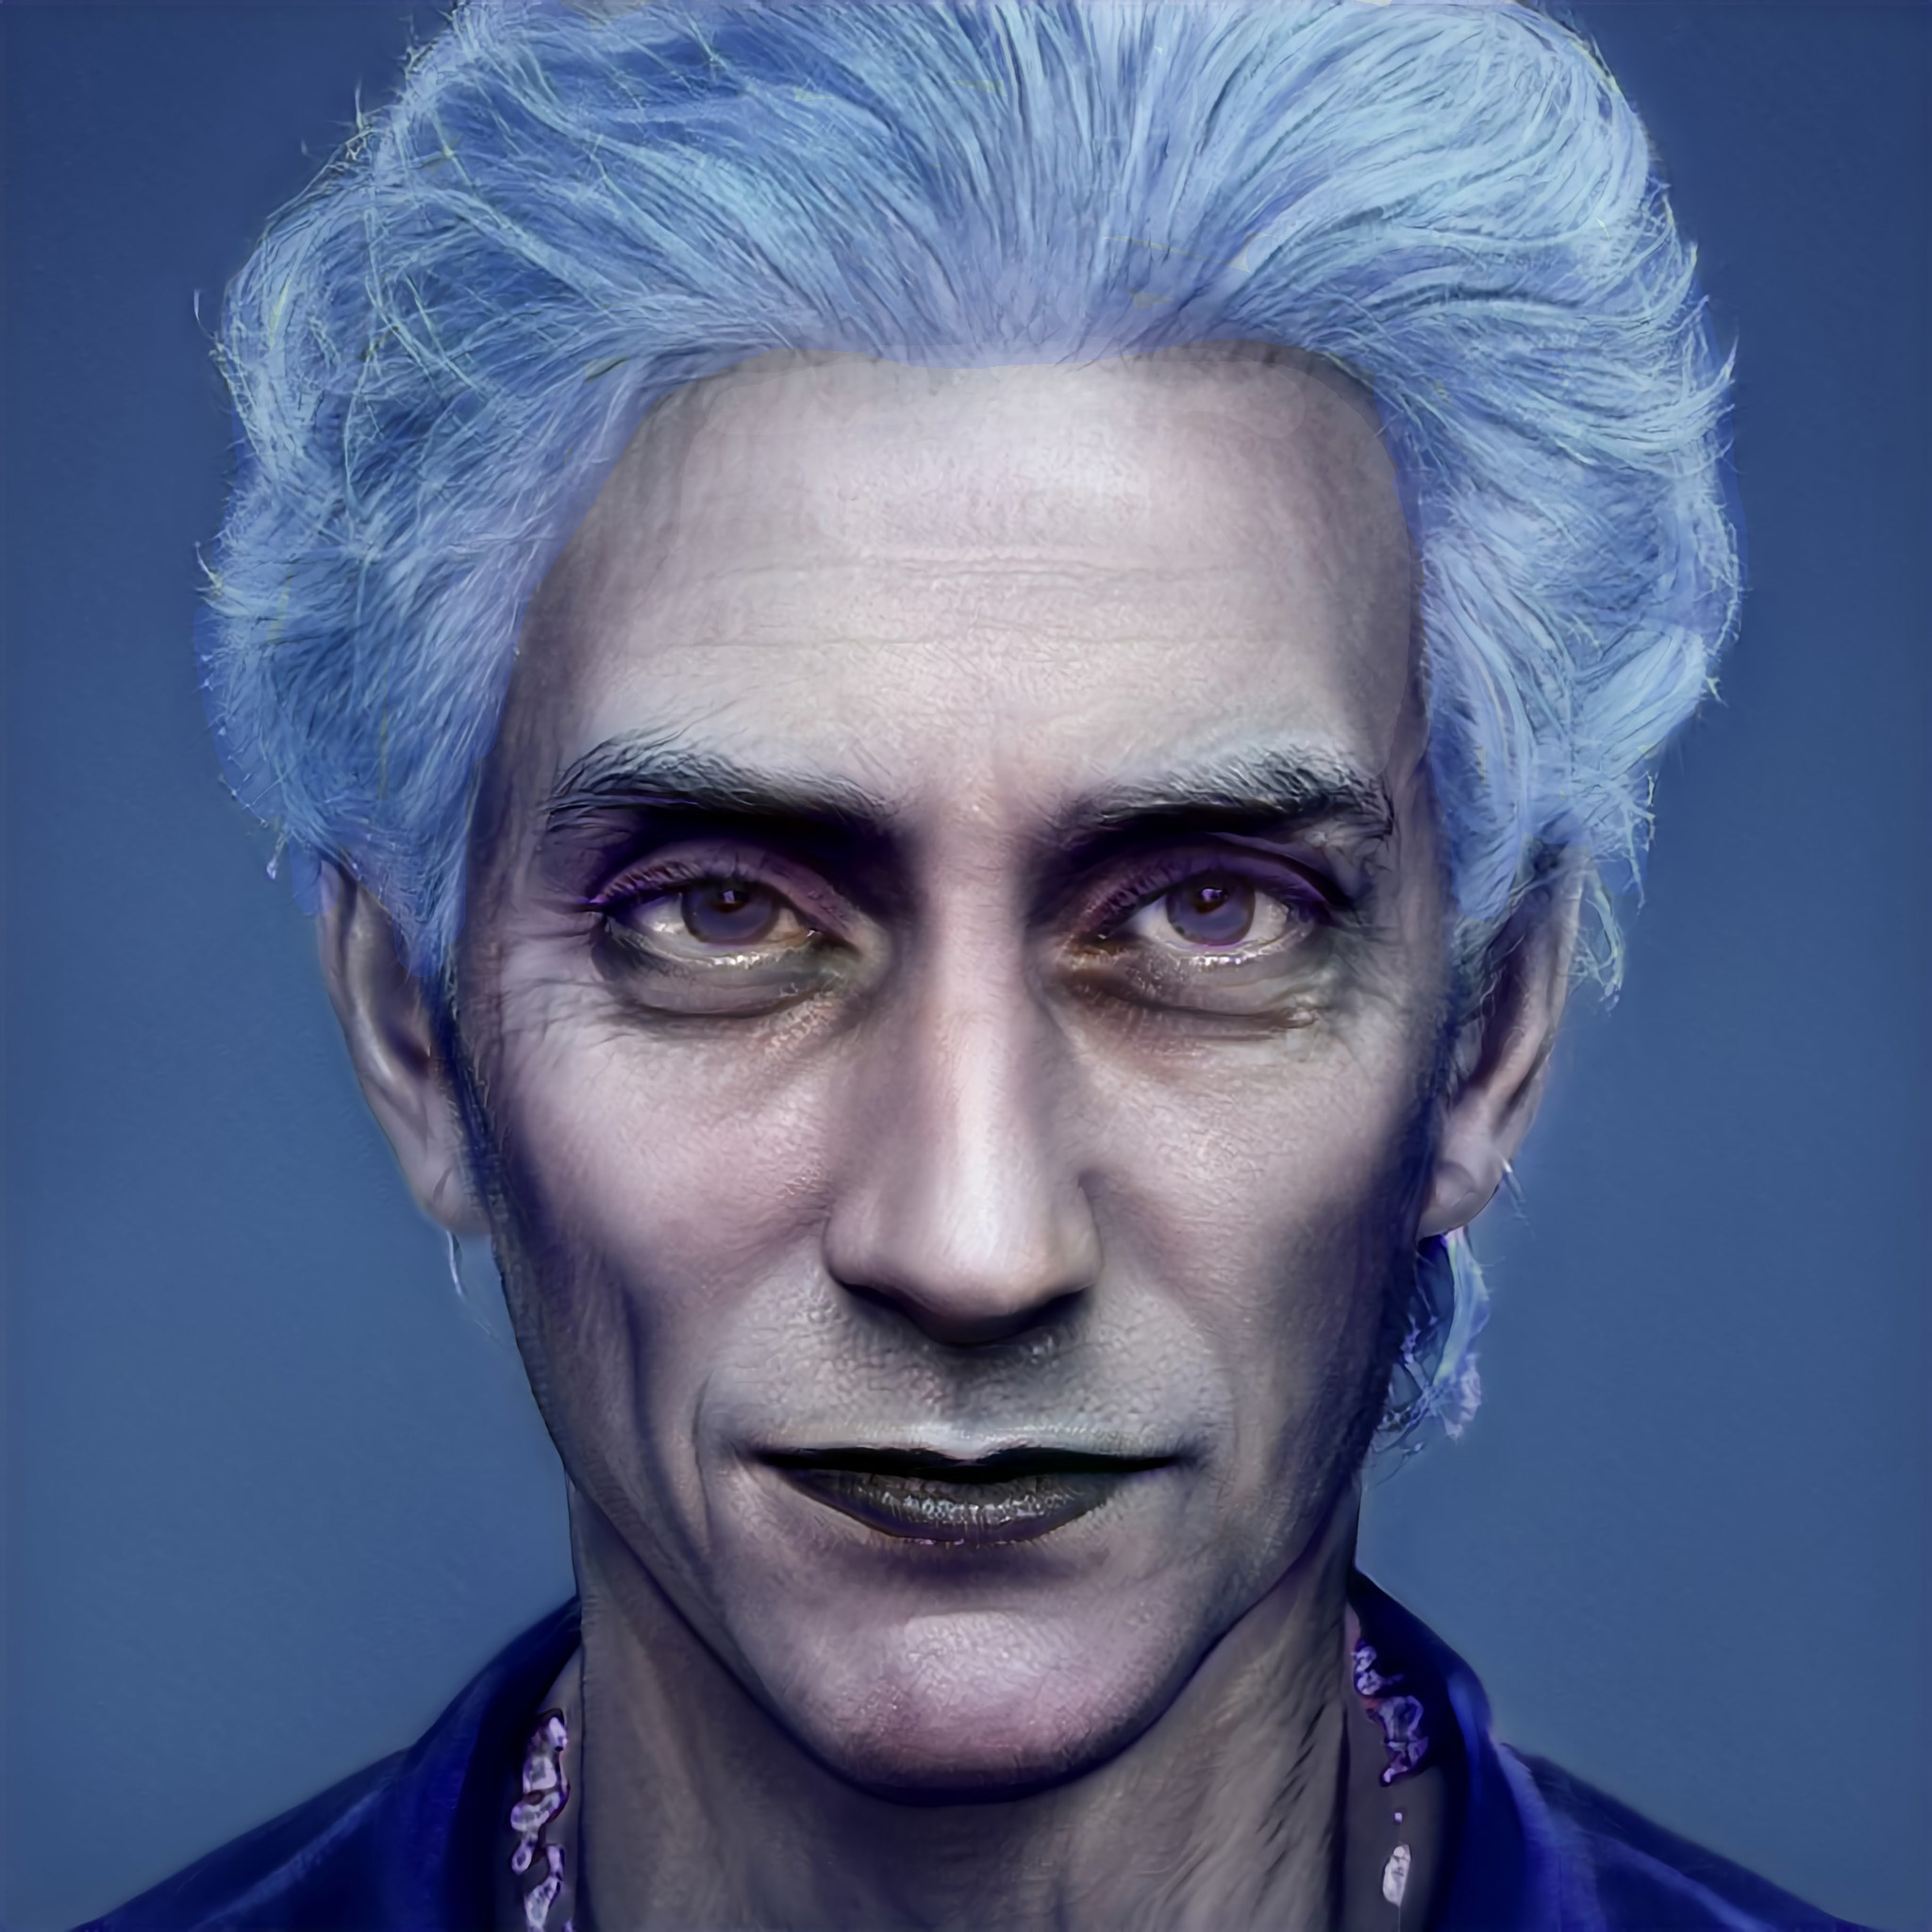 hades with sunken skin and blue hair